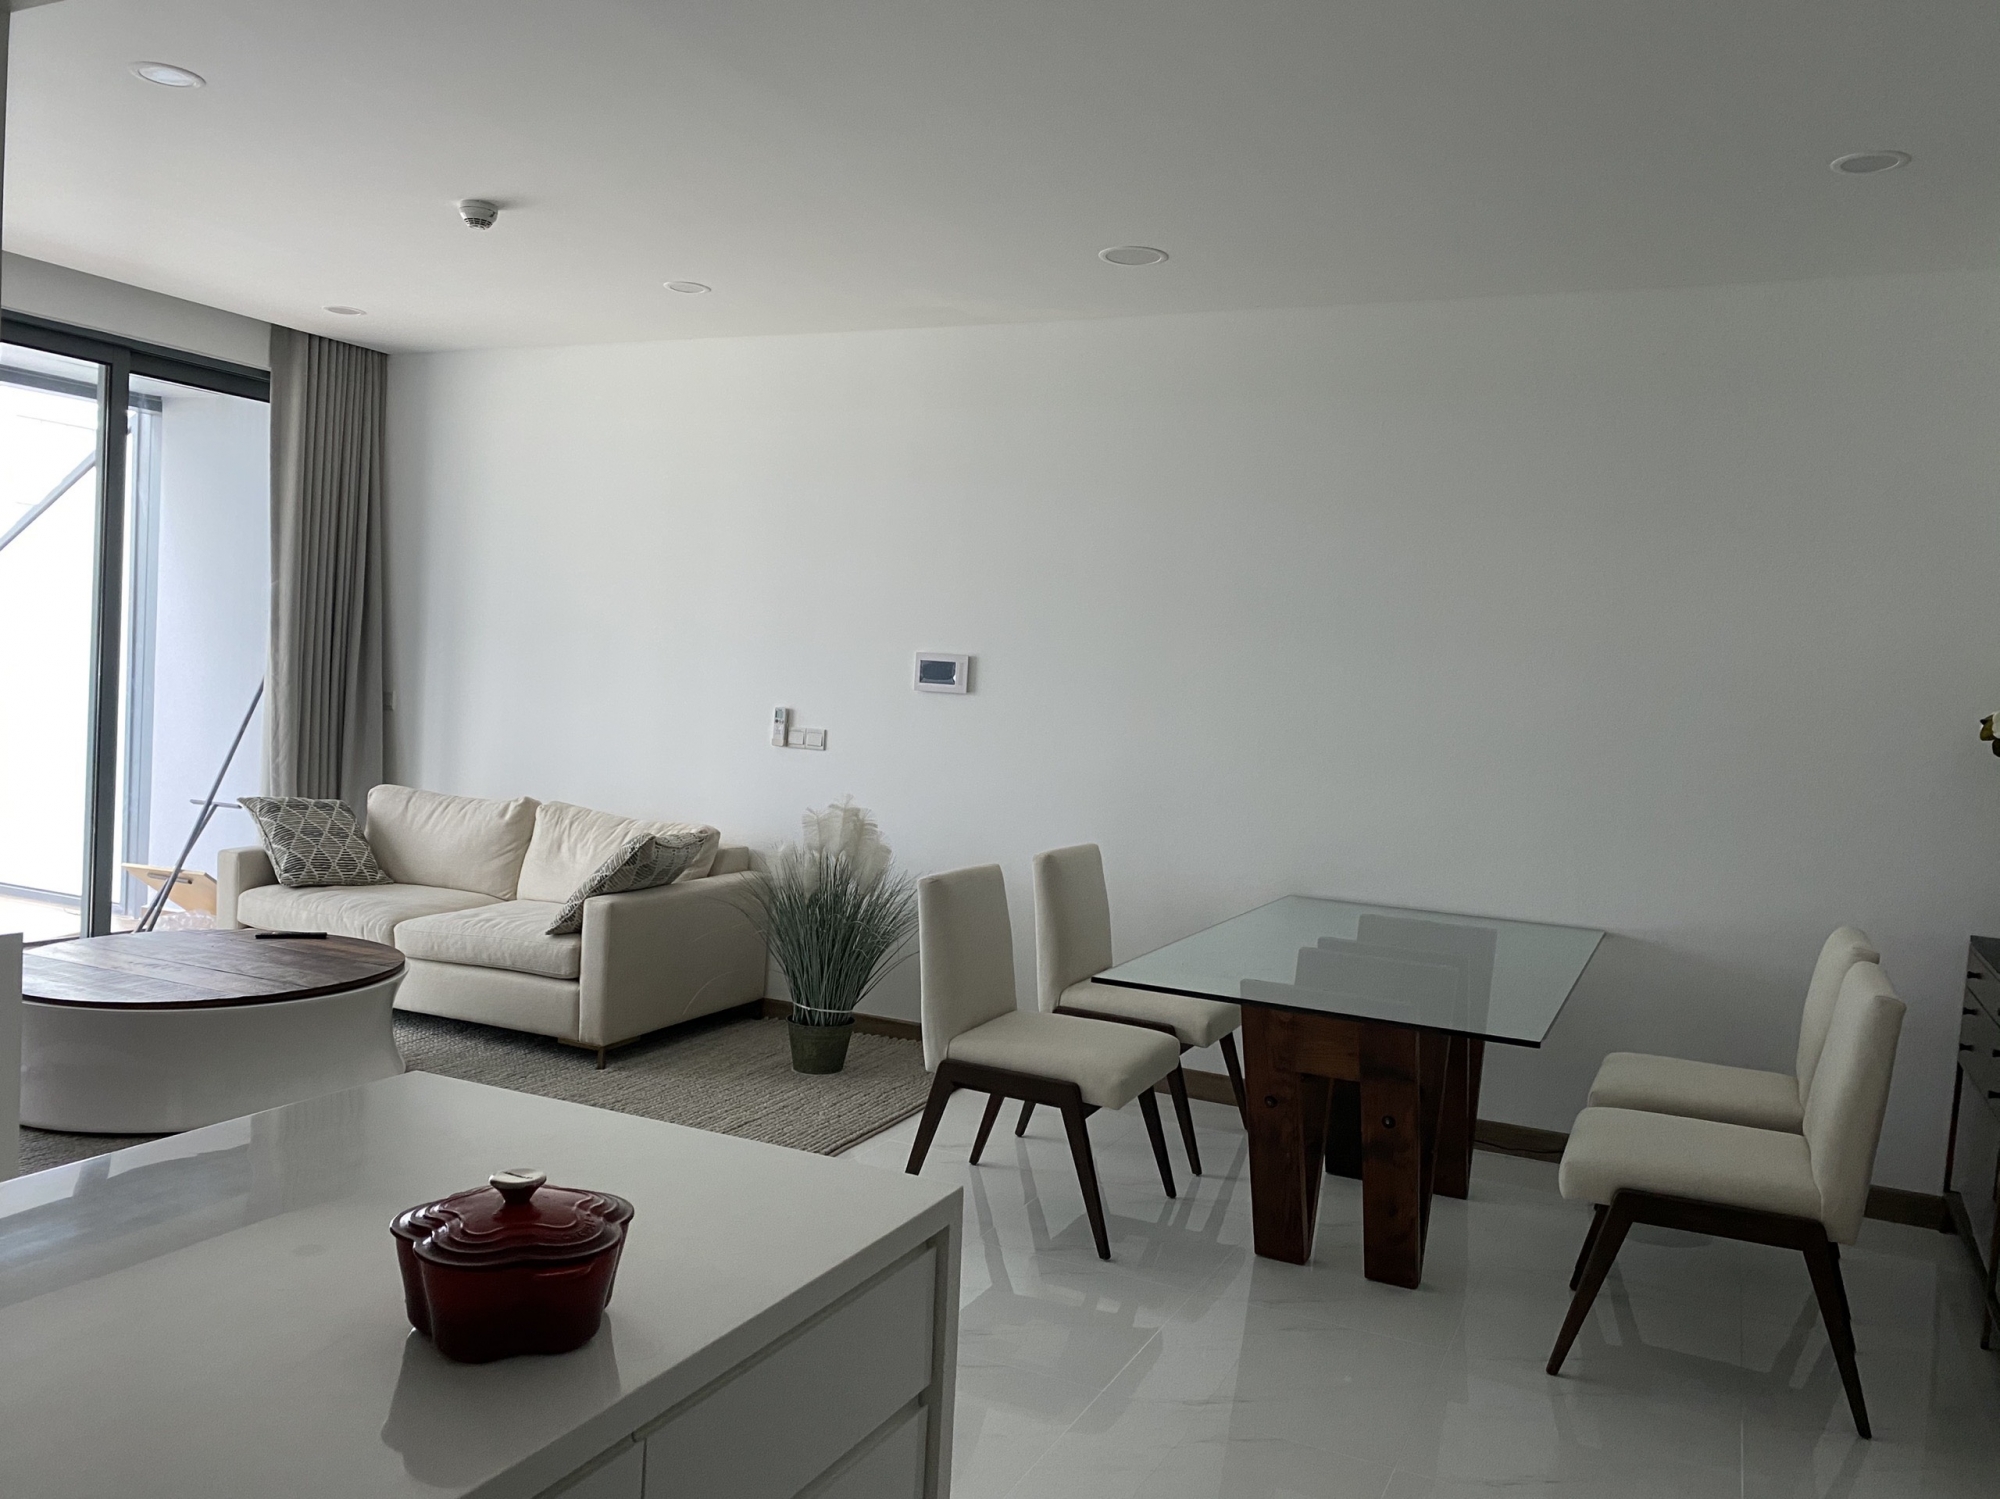 2 bedroom apartment for rent with garden in Sunwah Pearl